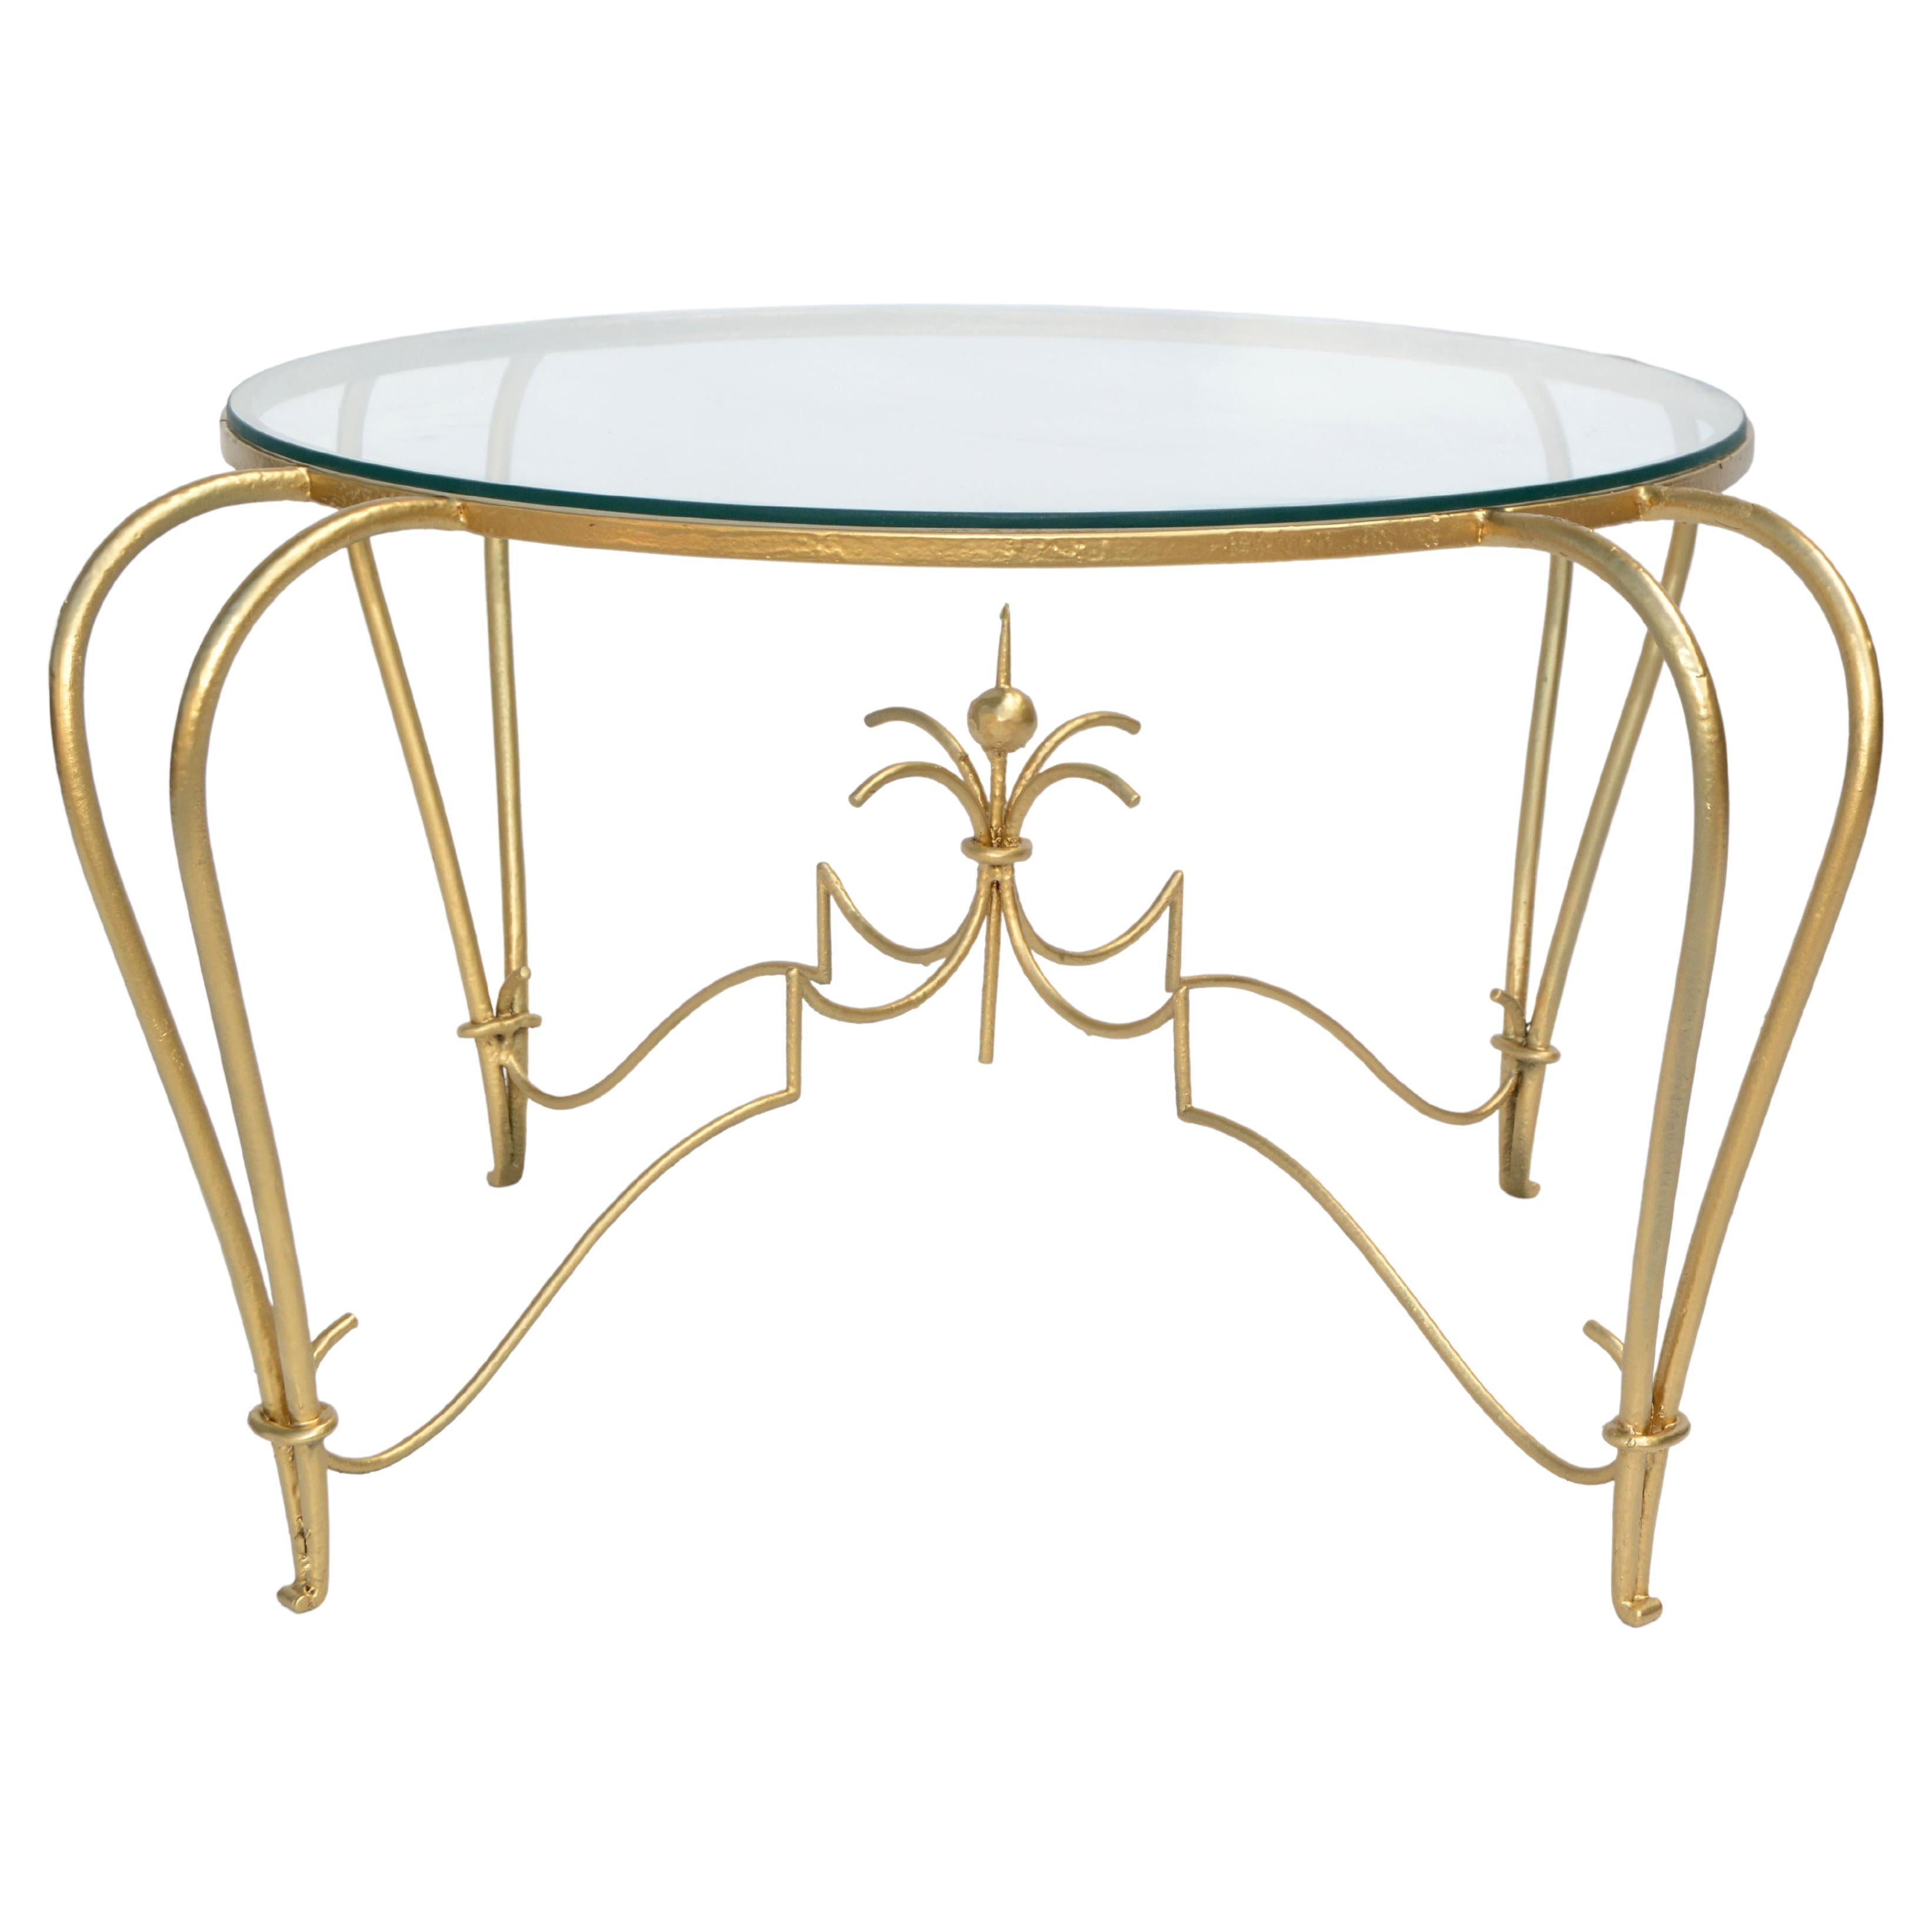 Art Deco Gold Finish Round Wrought Iron & Glass Top Cocktail Table, France, 1950 For Sale